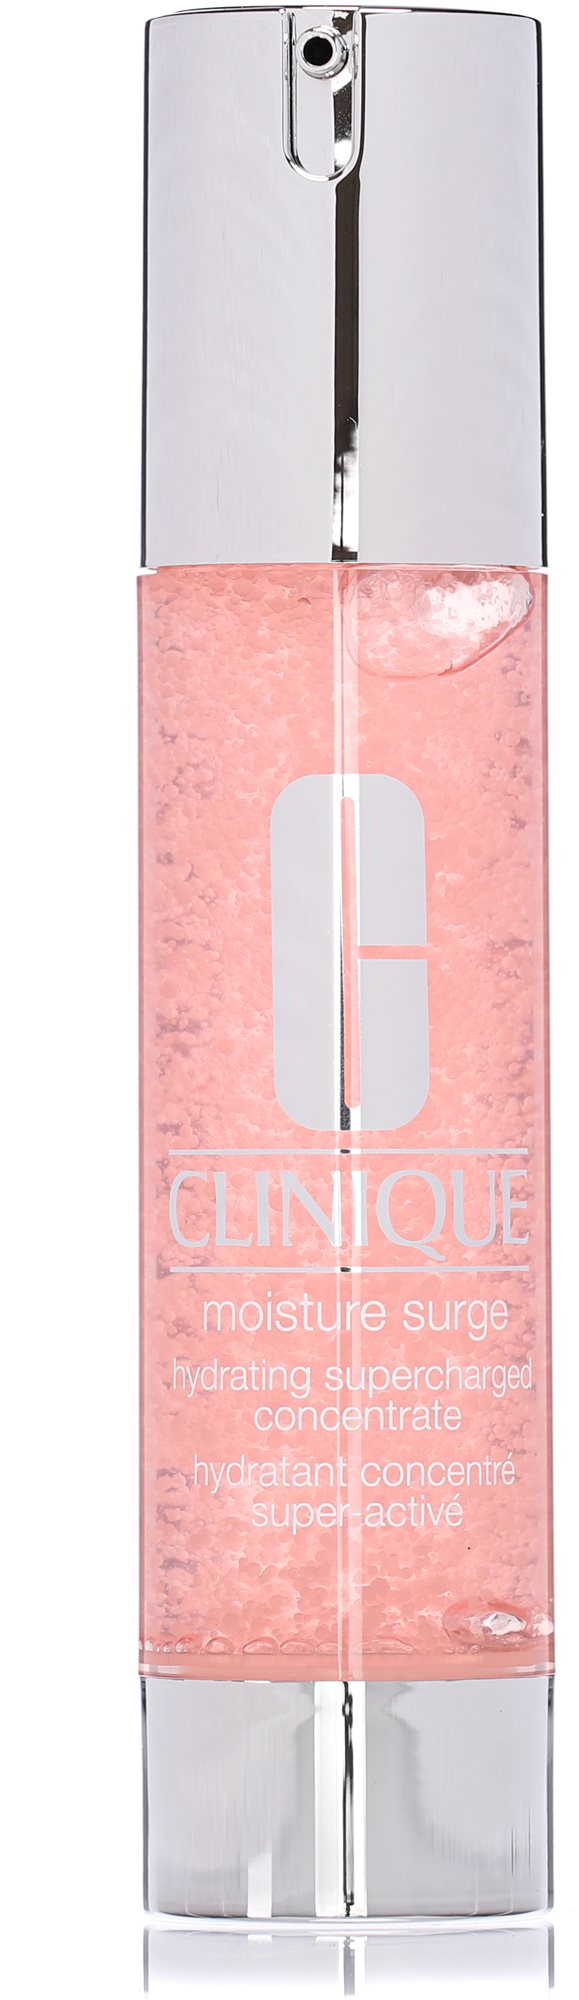 CLINIQUE Moisture Surge Hydrating Supercharged Concentrate 48 ml